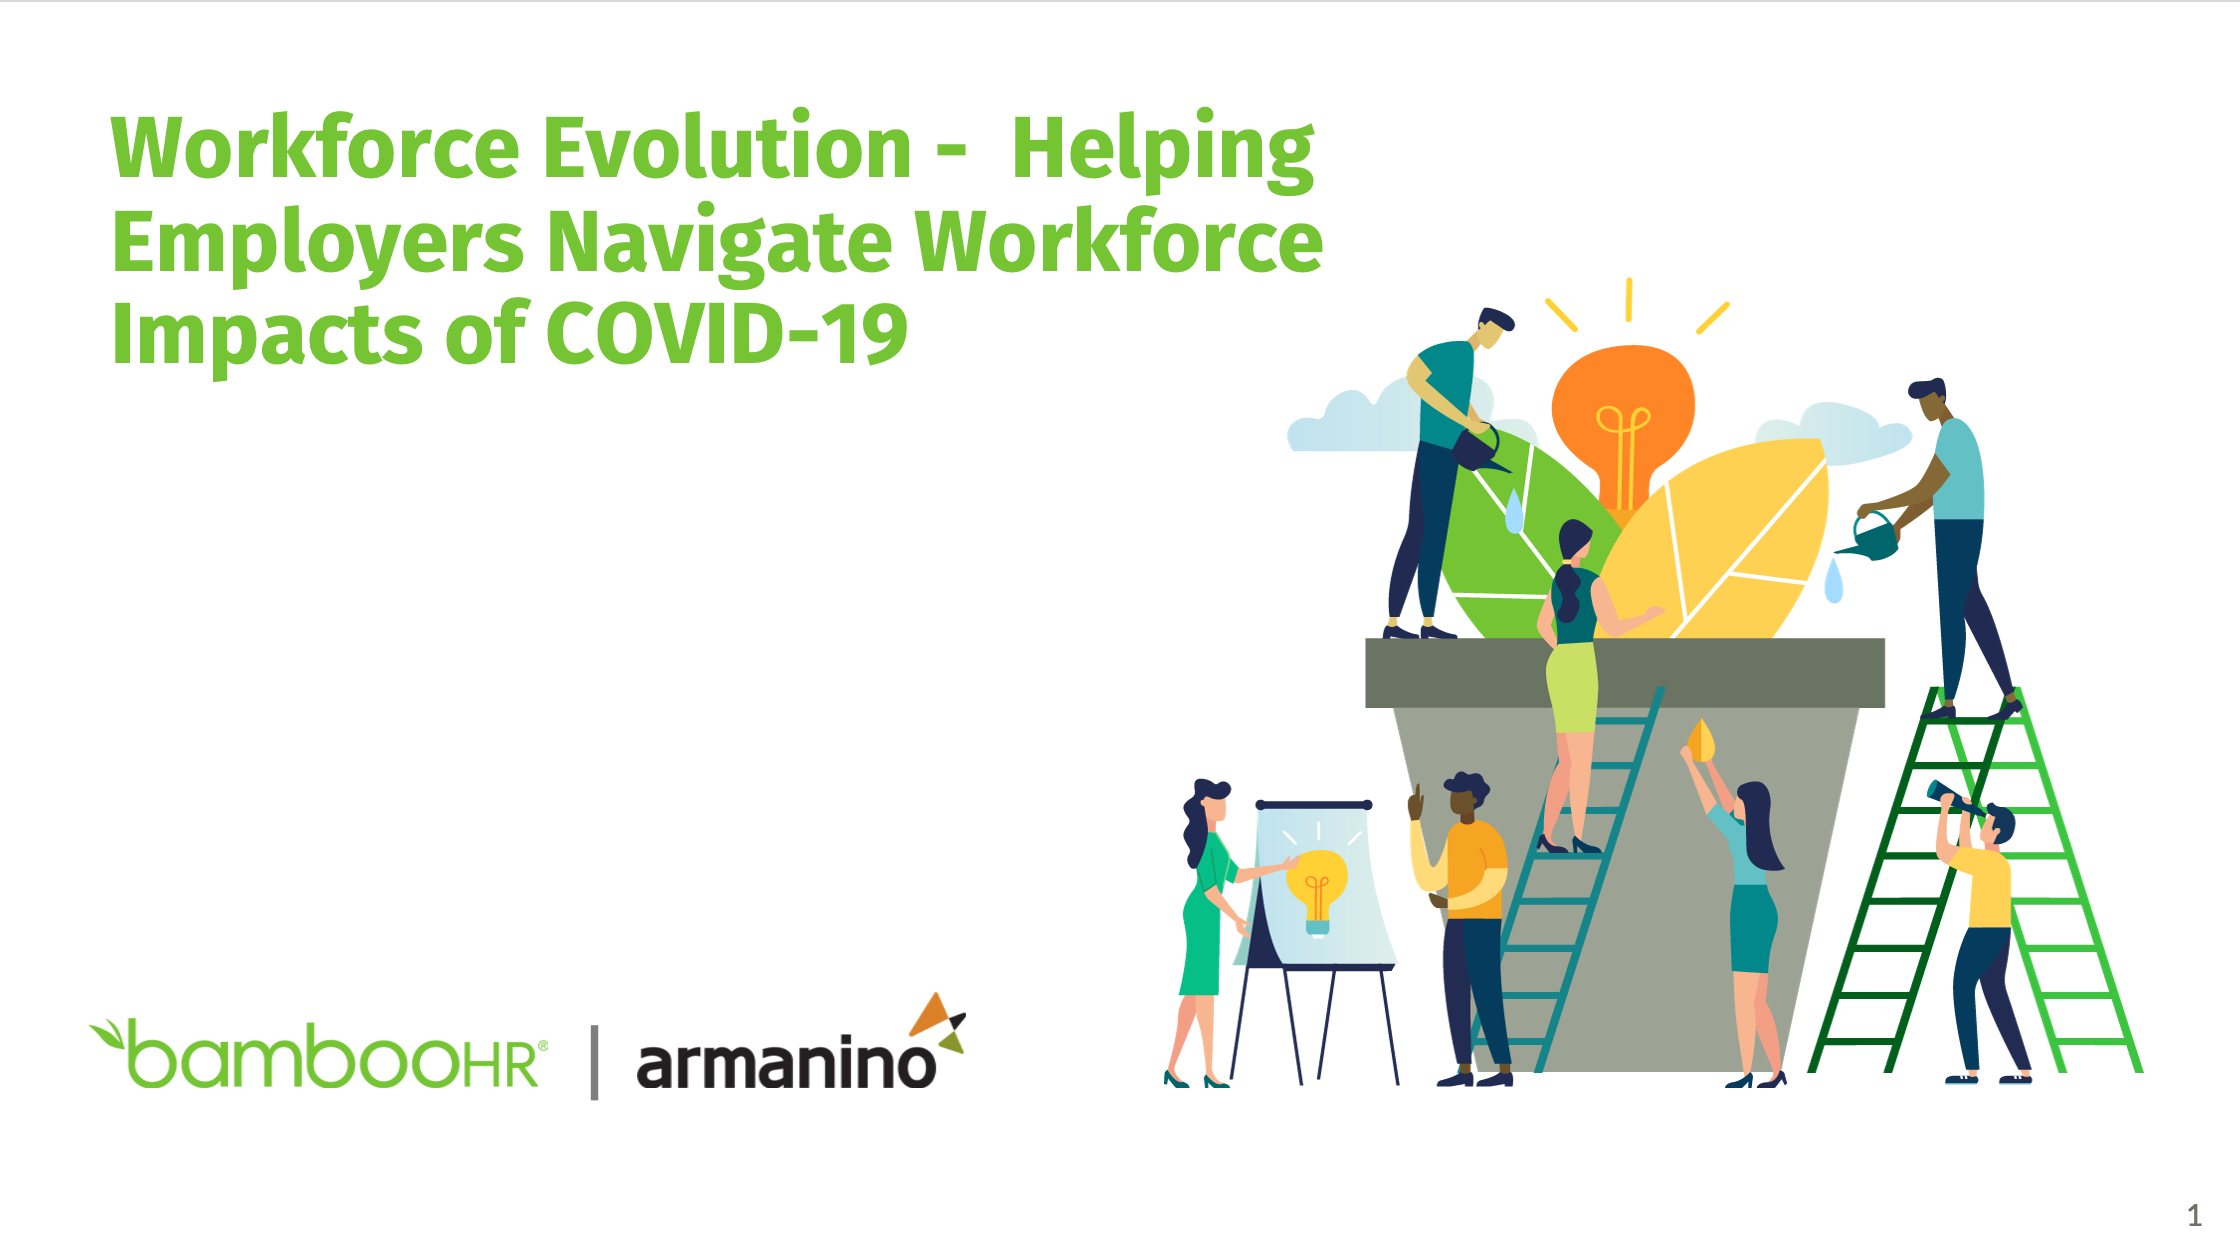 Workforce Evolution - Helping Employers Navigate Workforce Impacts of COVID-19